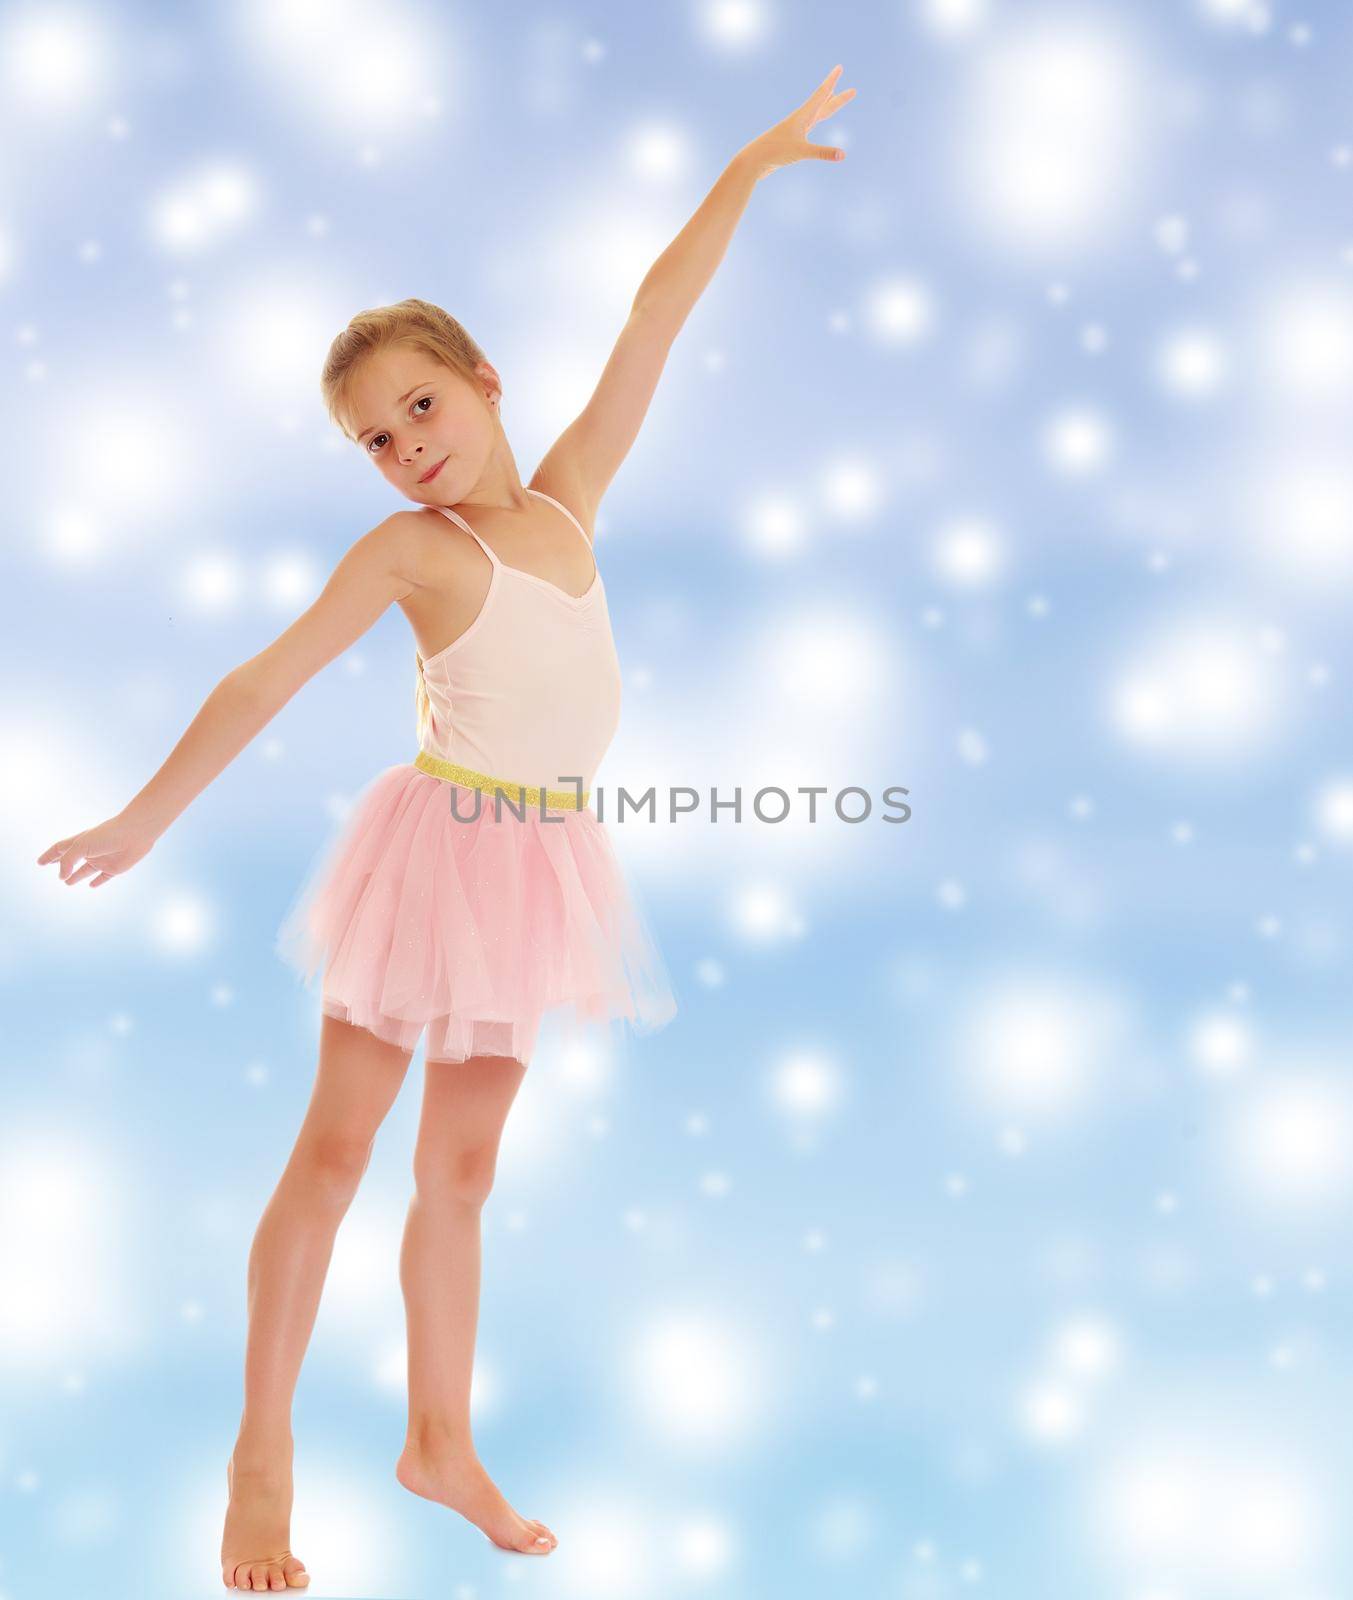 Charming little girl ballerina in a pink translucent dress.On a blue background with large, white, Christmas or new year's snowflakes.